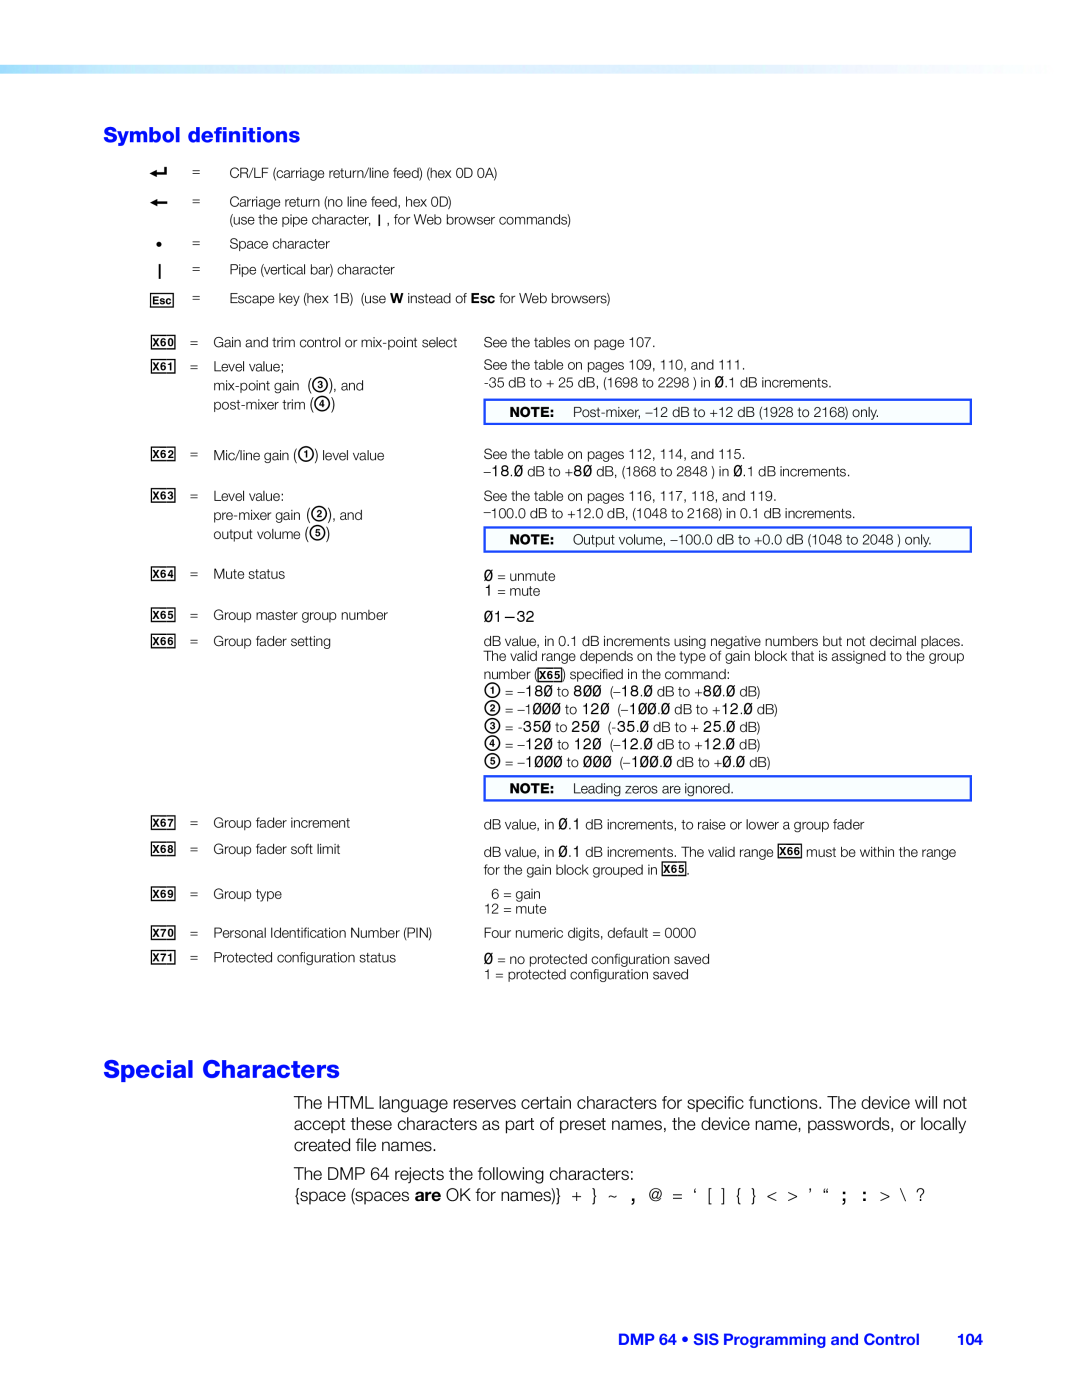 Extron electronic manual Special Characters, Symbol definitions, DMP 64 • SIS Programming and Control 